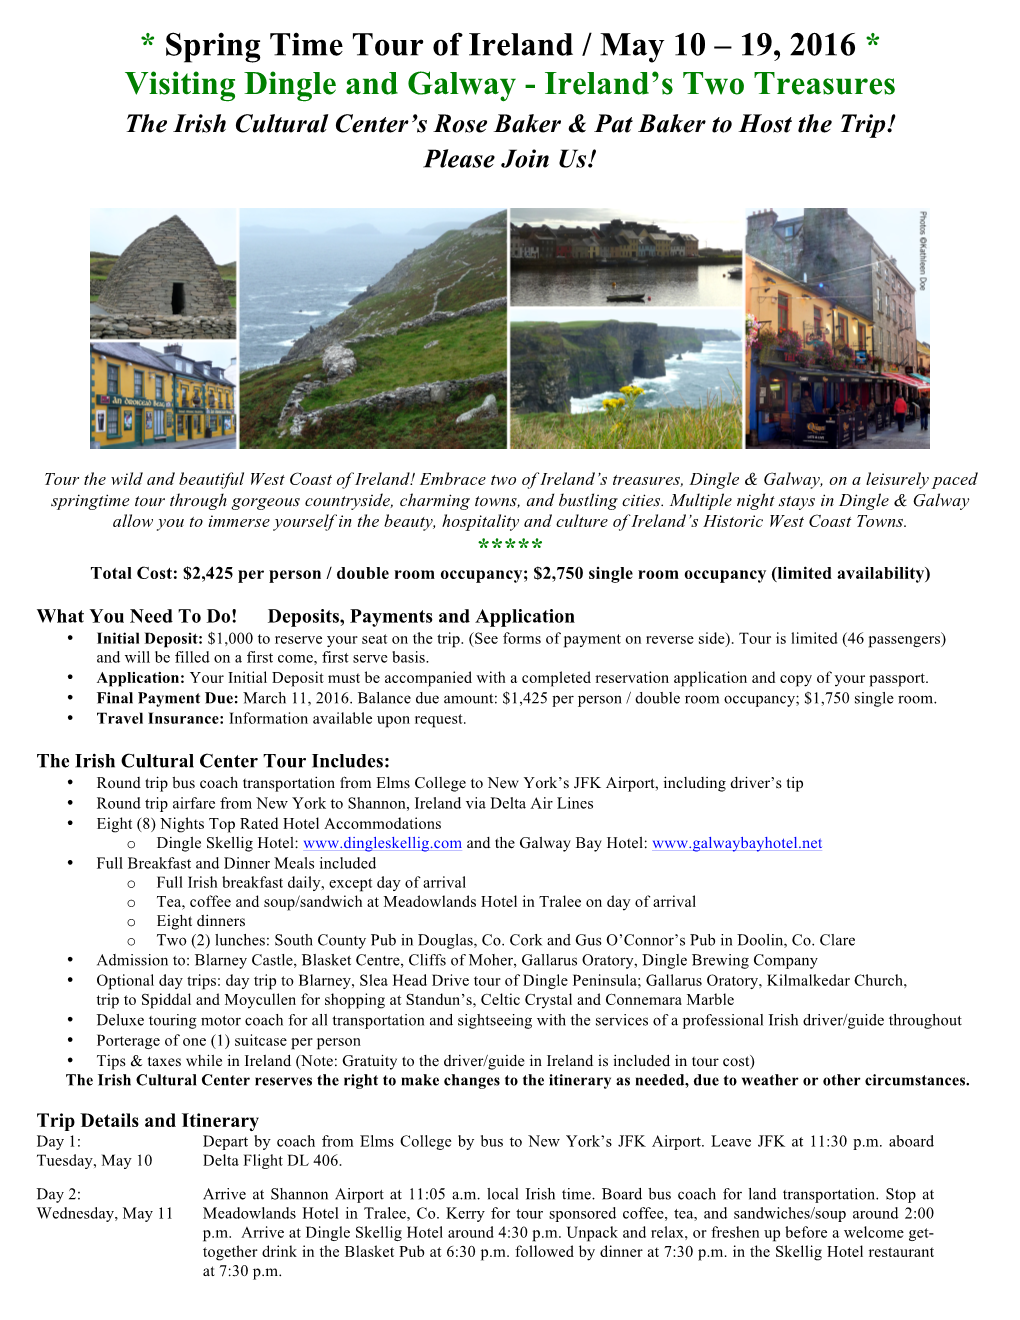 * Spring Time Tour of Ireland / May 10 – 19, 2016 * Visiting Dingle And